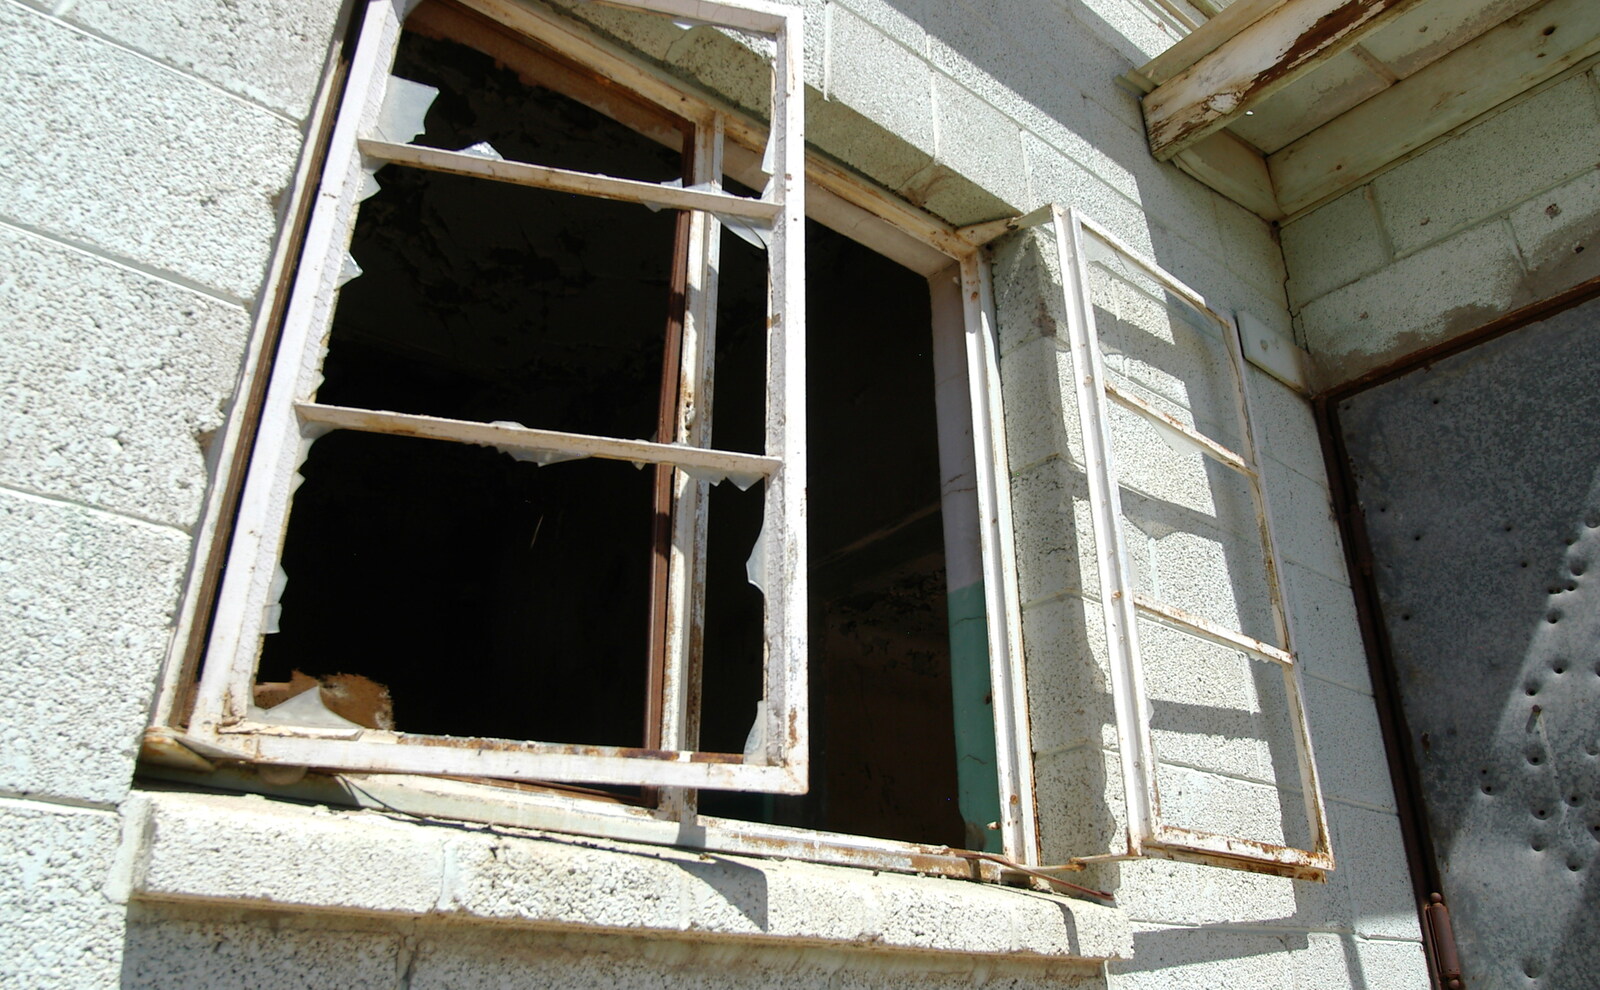 Smashed 1930s-style windows from California Desert: El Centro, Imperial Valley, California, US - 24th September 2005